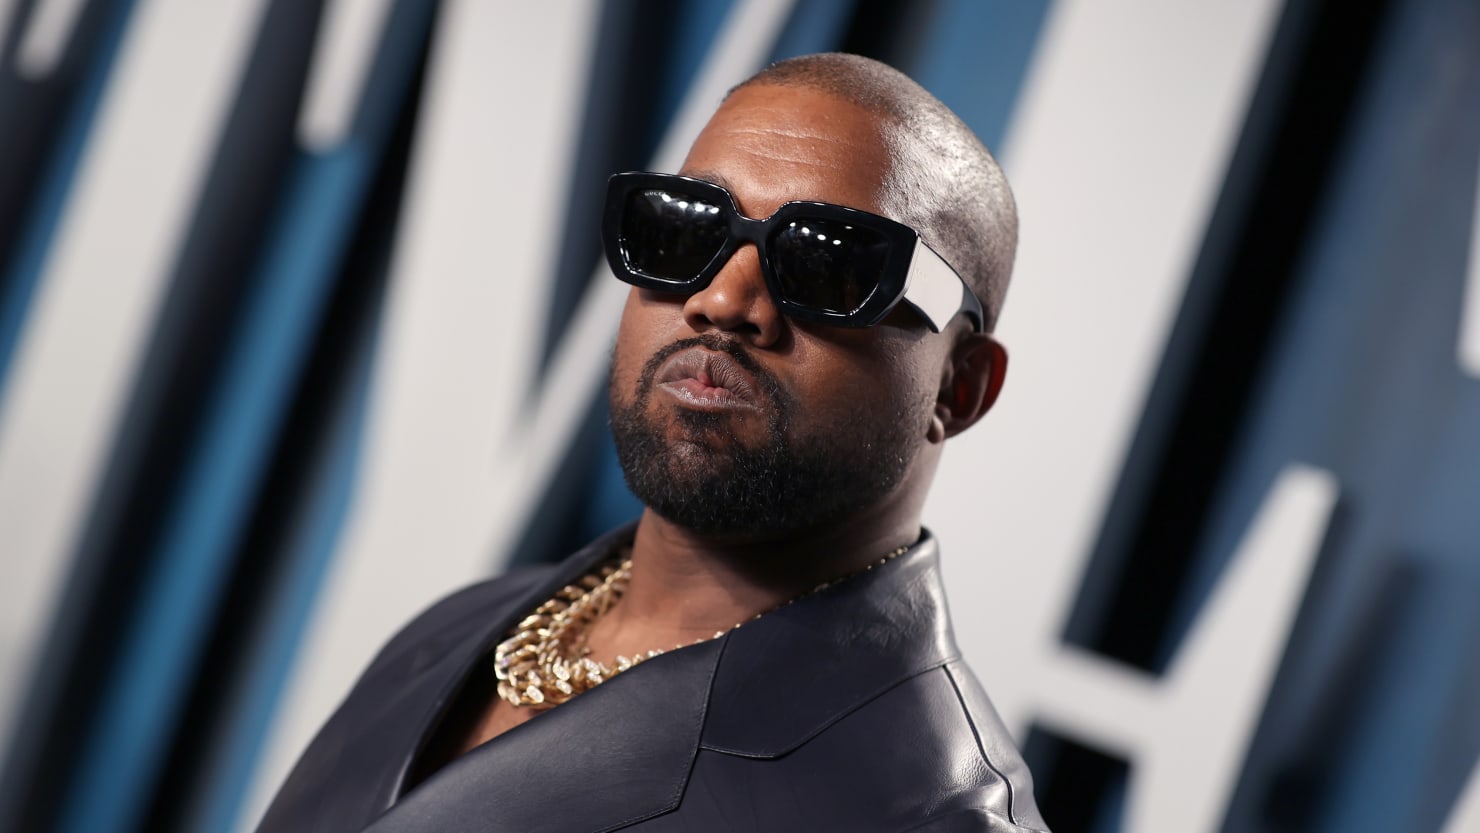 Kanye West Allegedly Faces Explosive Lawsuit for Shaving Heads and Spewing Antisemitic Rhetoric at Christian School